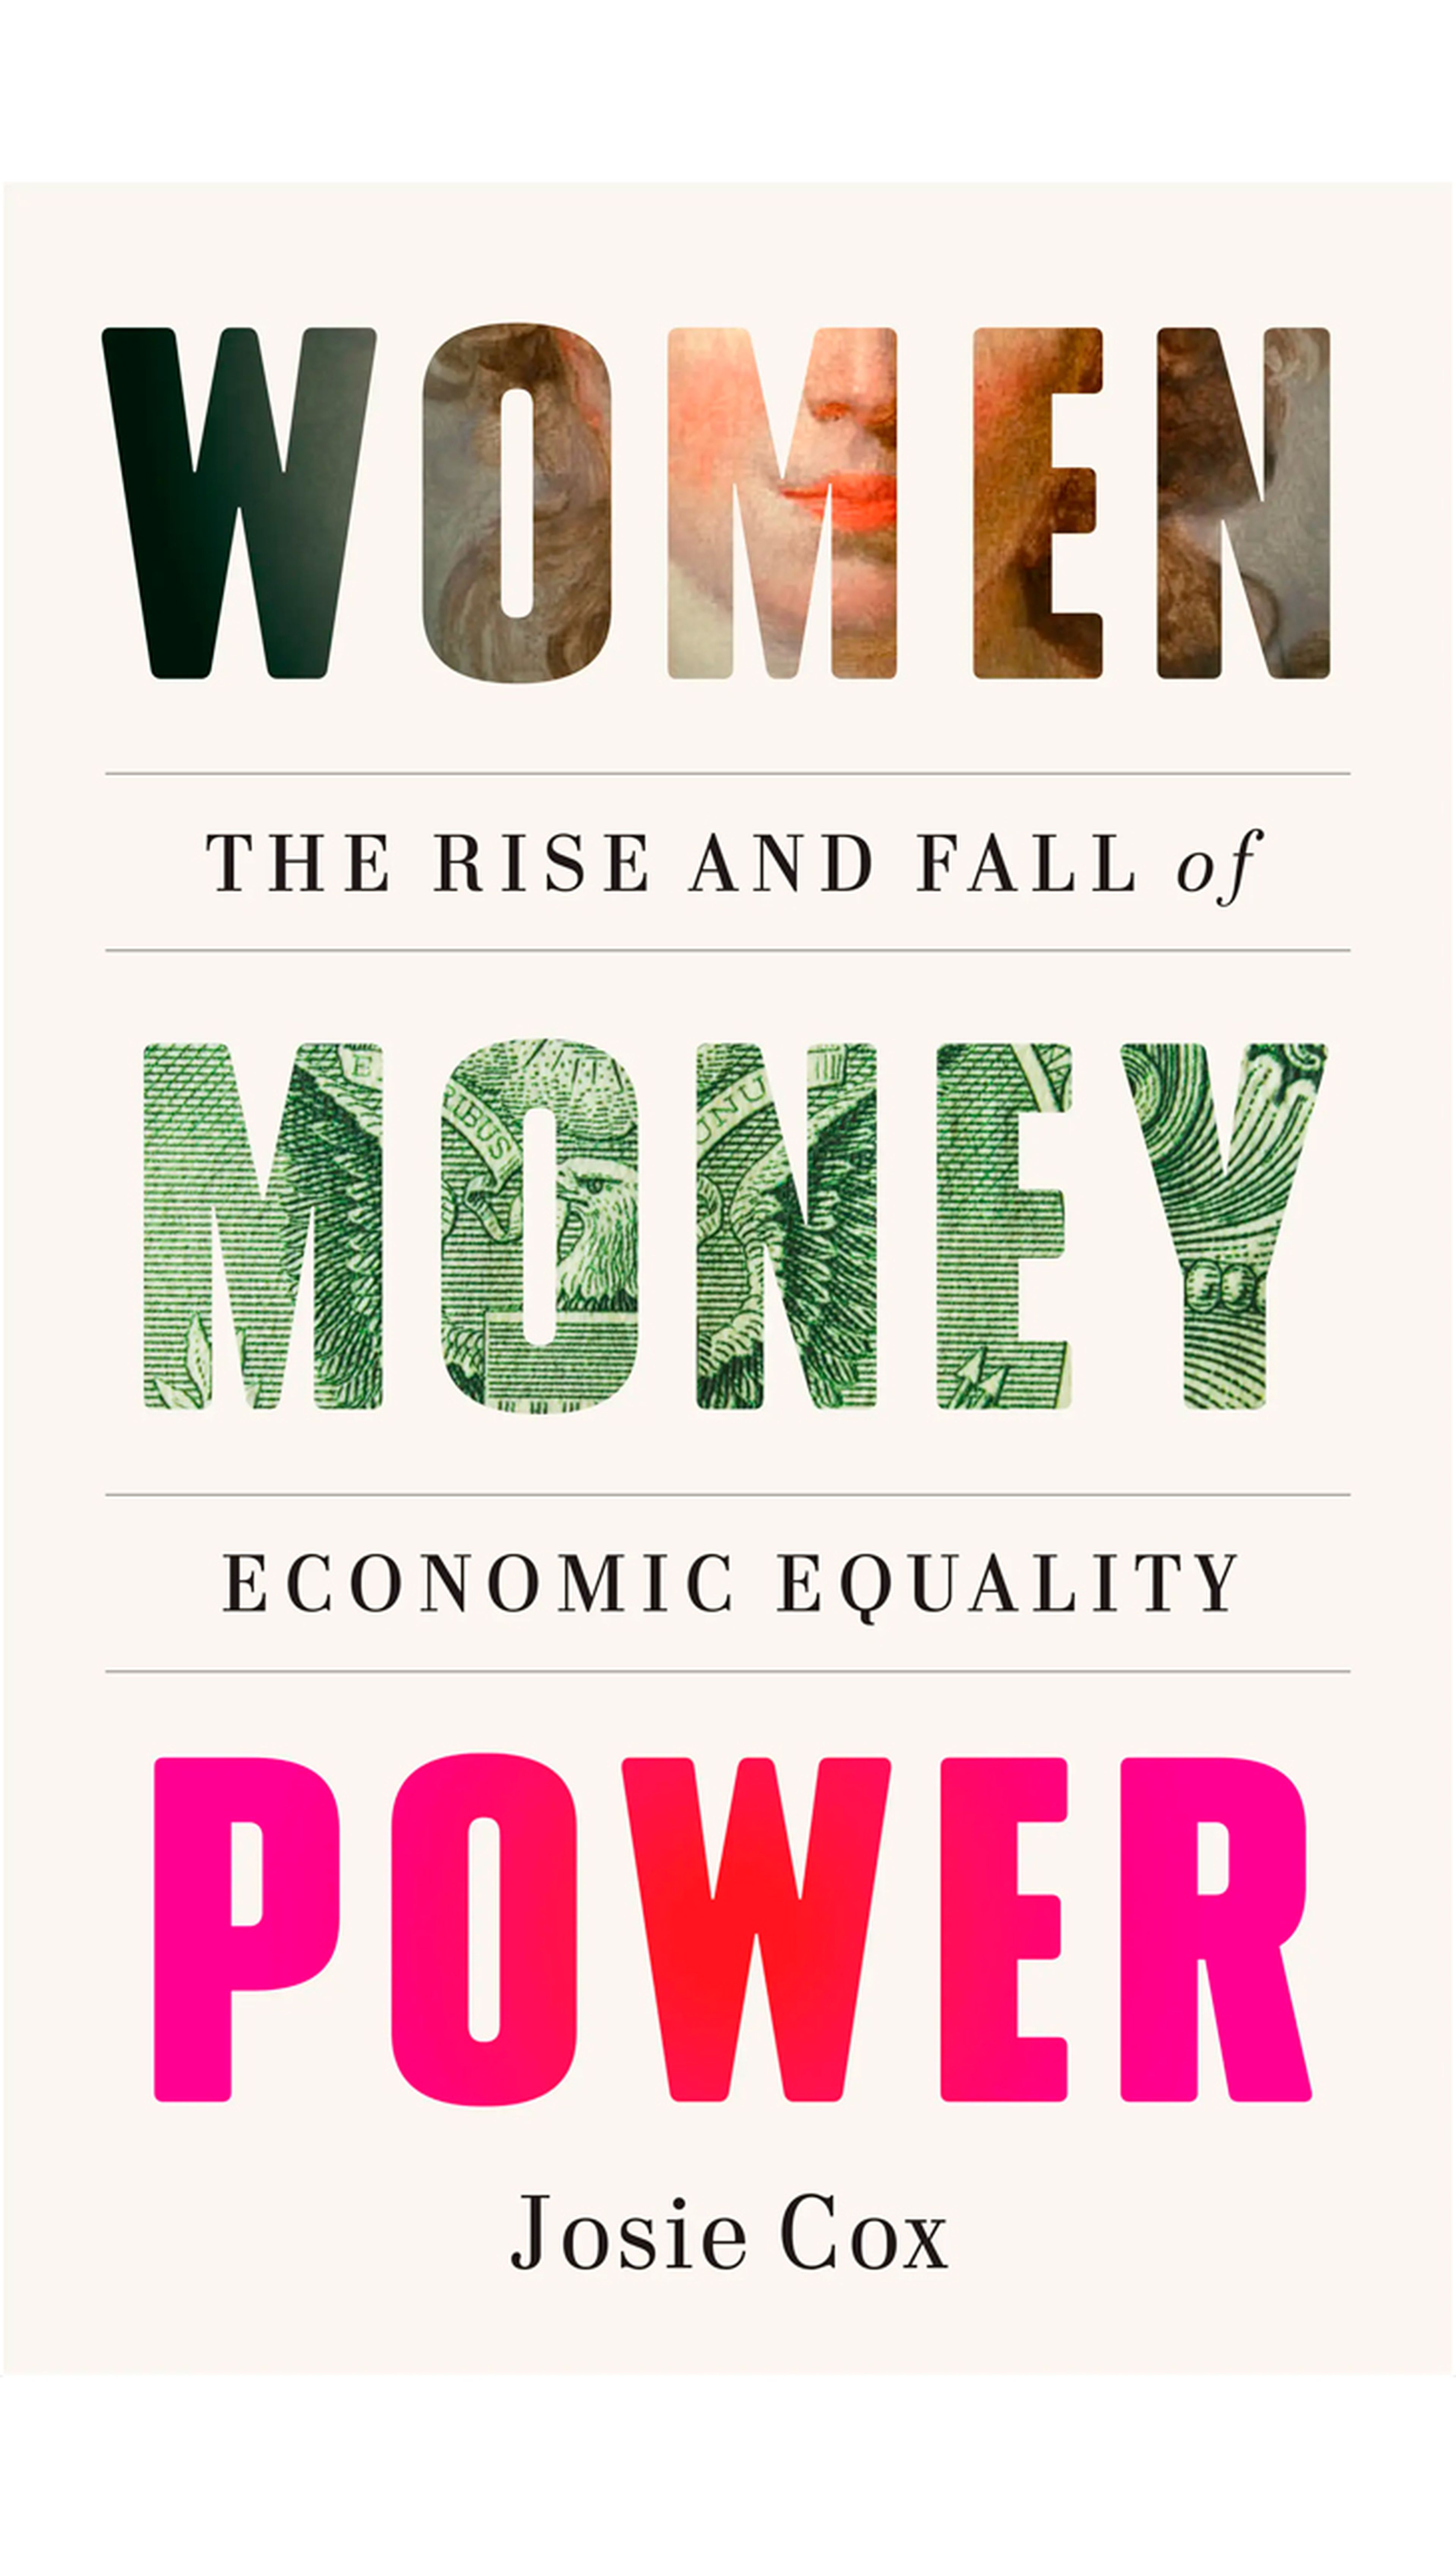 WOMEN MONEY POWER: The Rise and Fall of Economic Equality de Josie Cox.